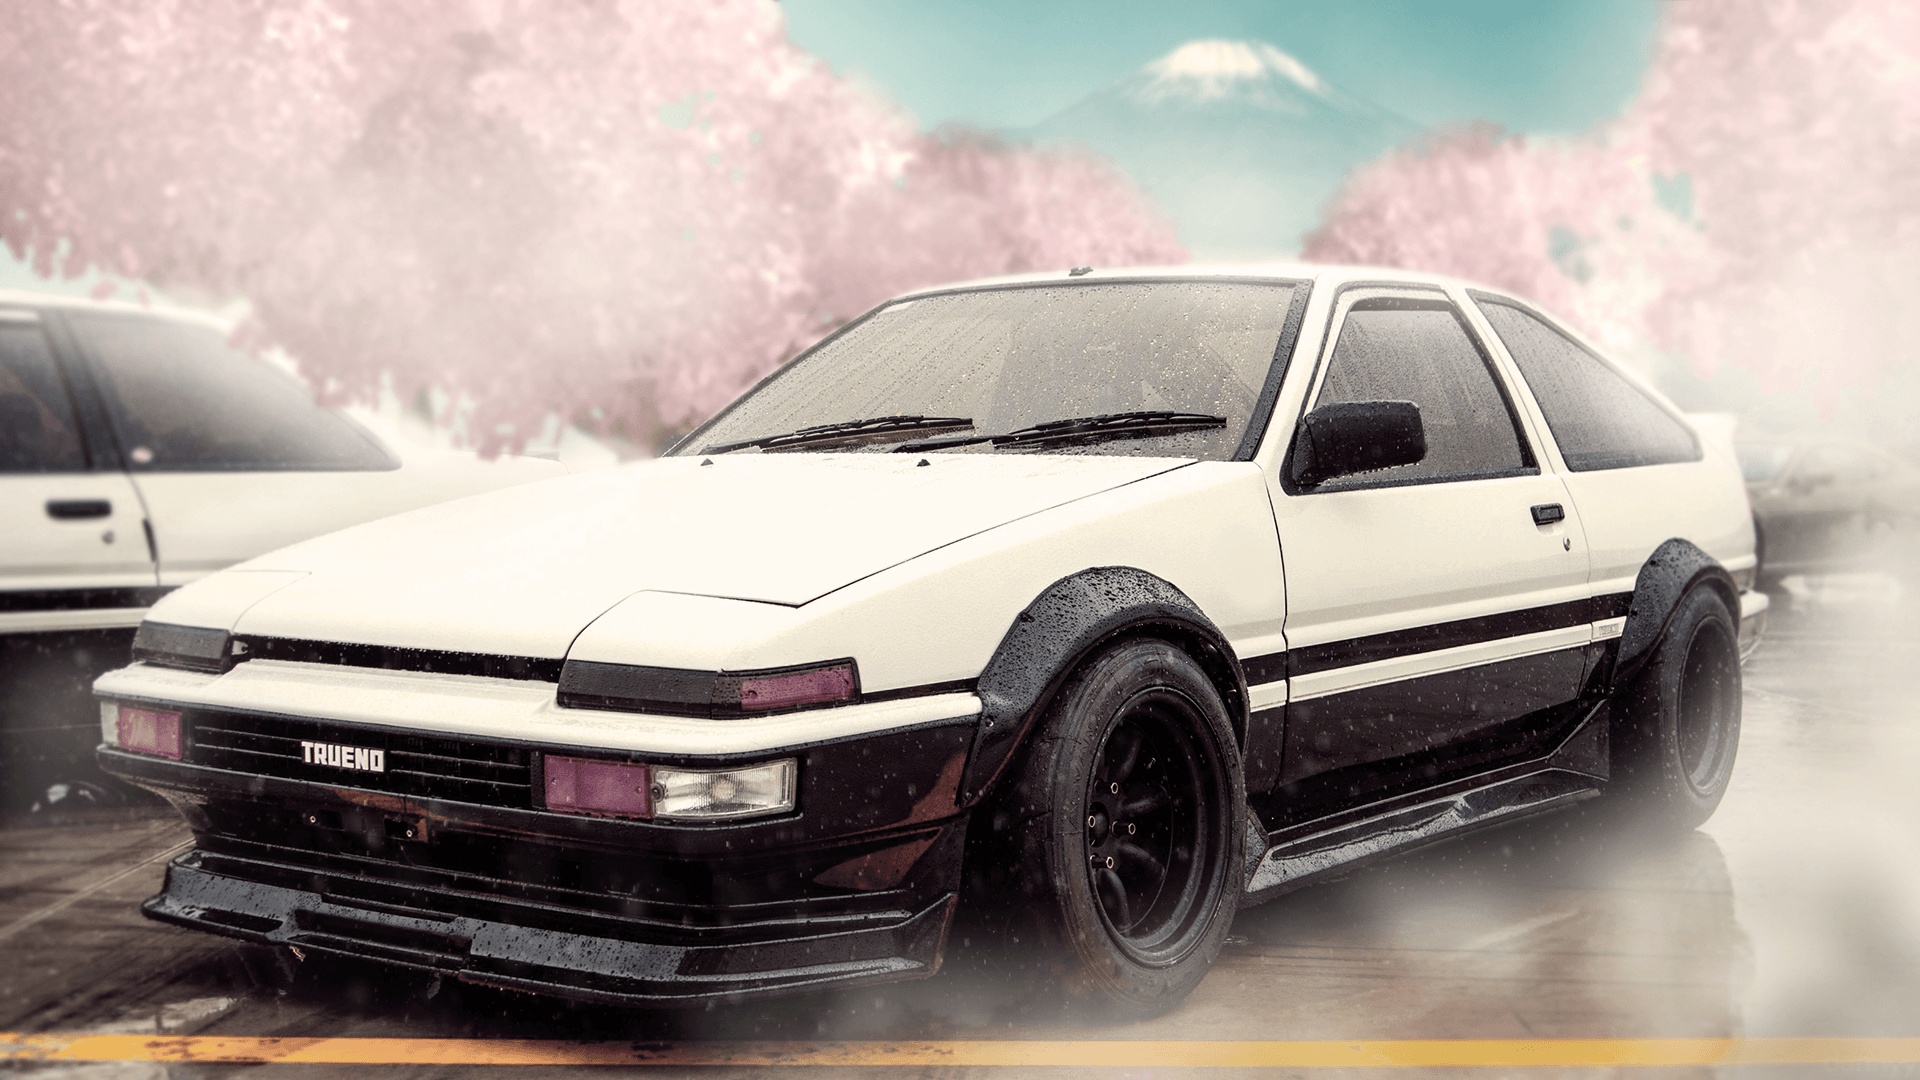 1440x2960 Resolution toyota corolla ae86 Samsung Galaxy Note 98  S9S8S8 QHD Wallpaper  Wallpapers Den